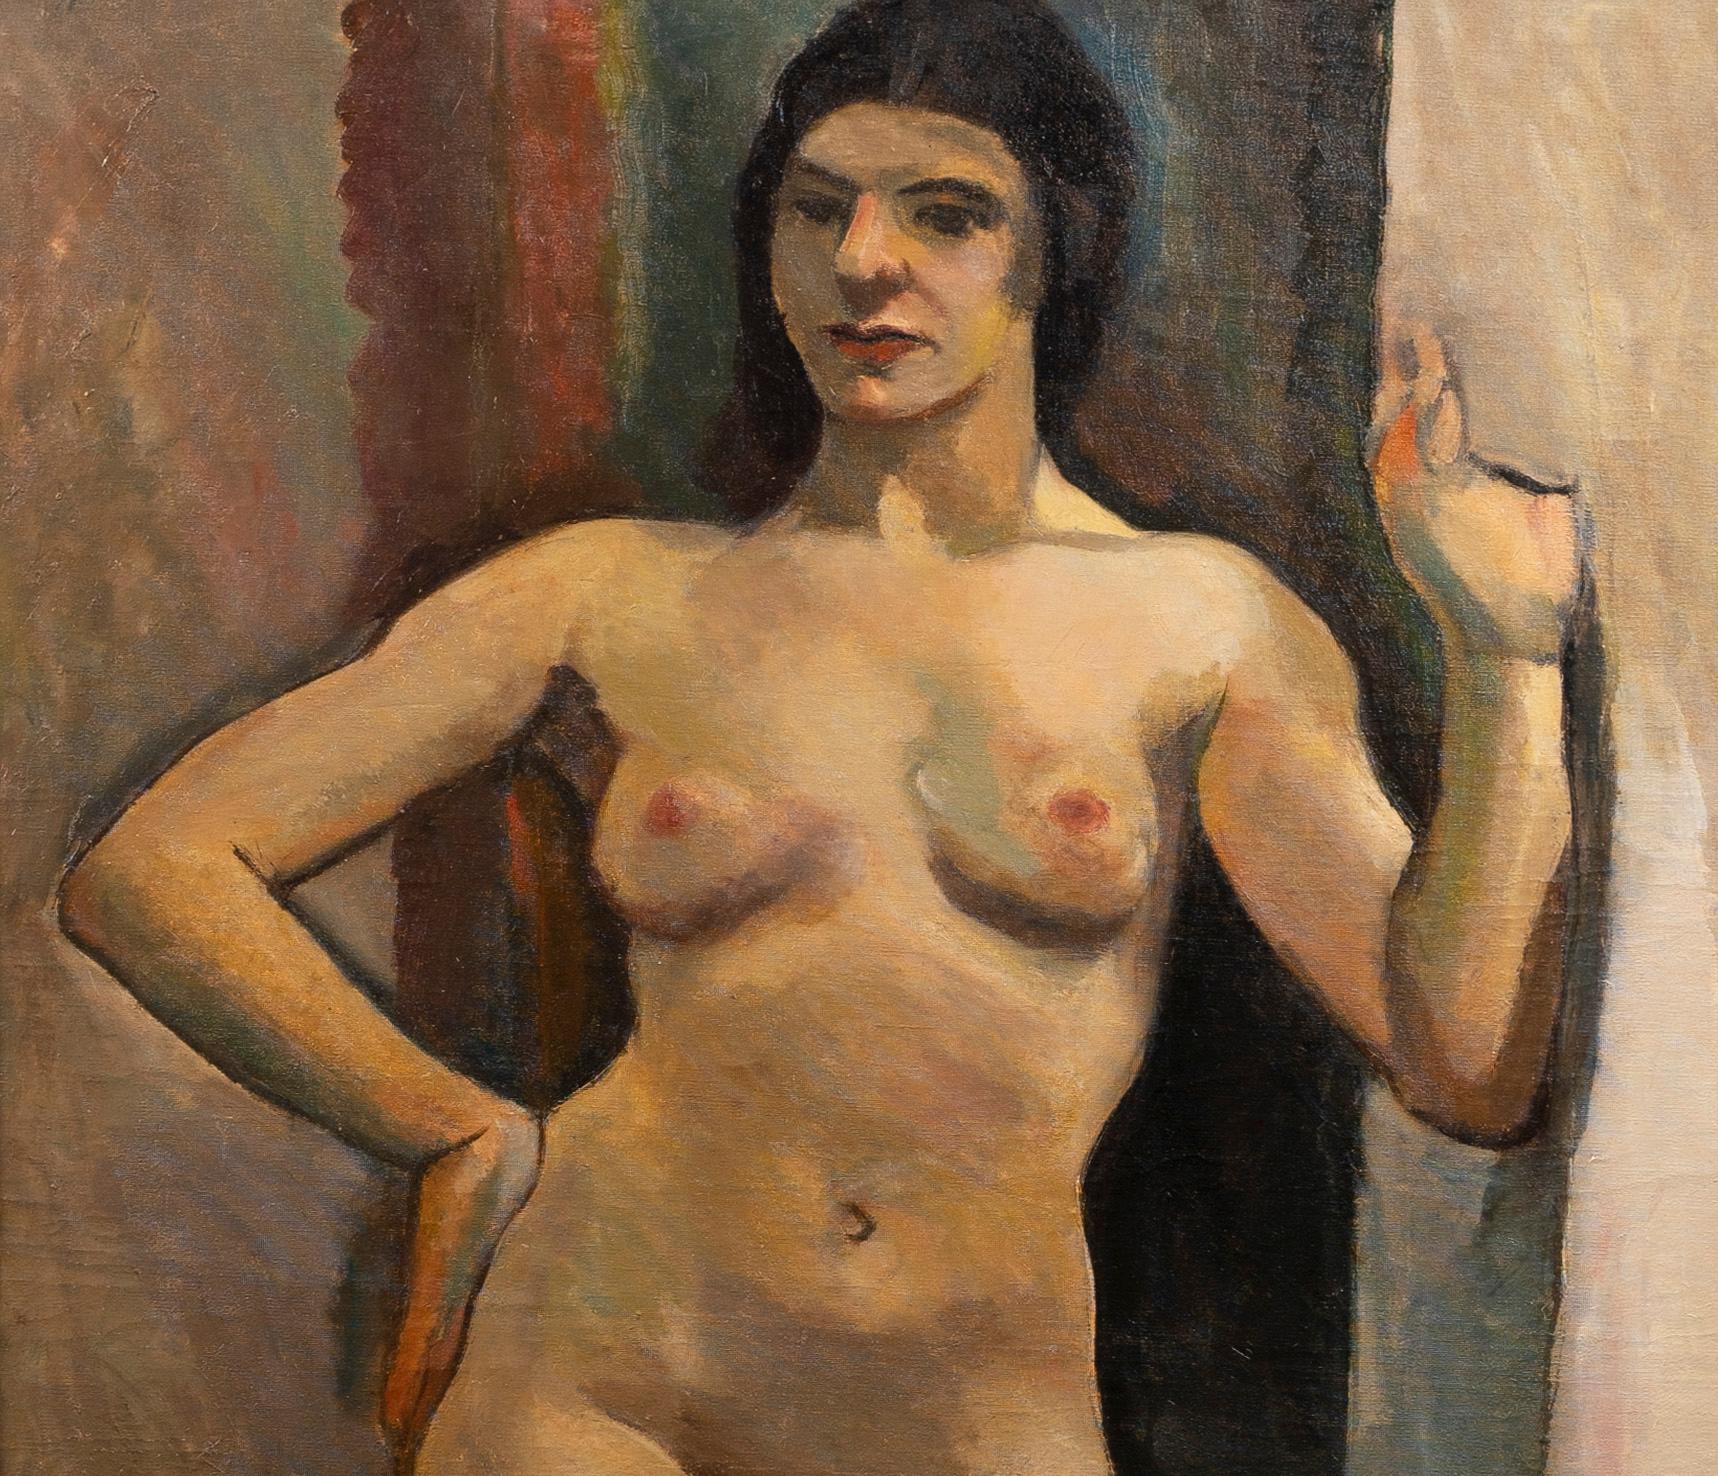 Antique American Life Size Huge WPA Nude Woman Artist Studio Portrait Painting  - Brown Interior Painting by Unknown